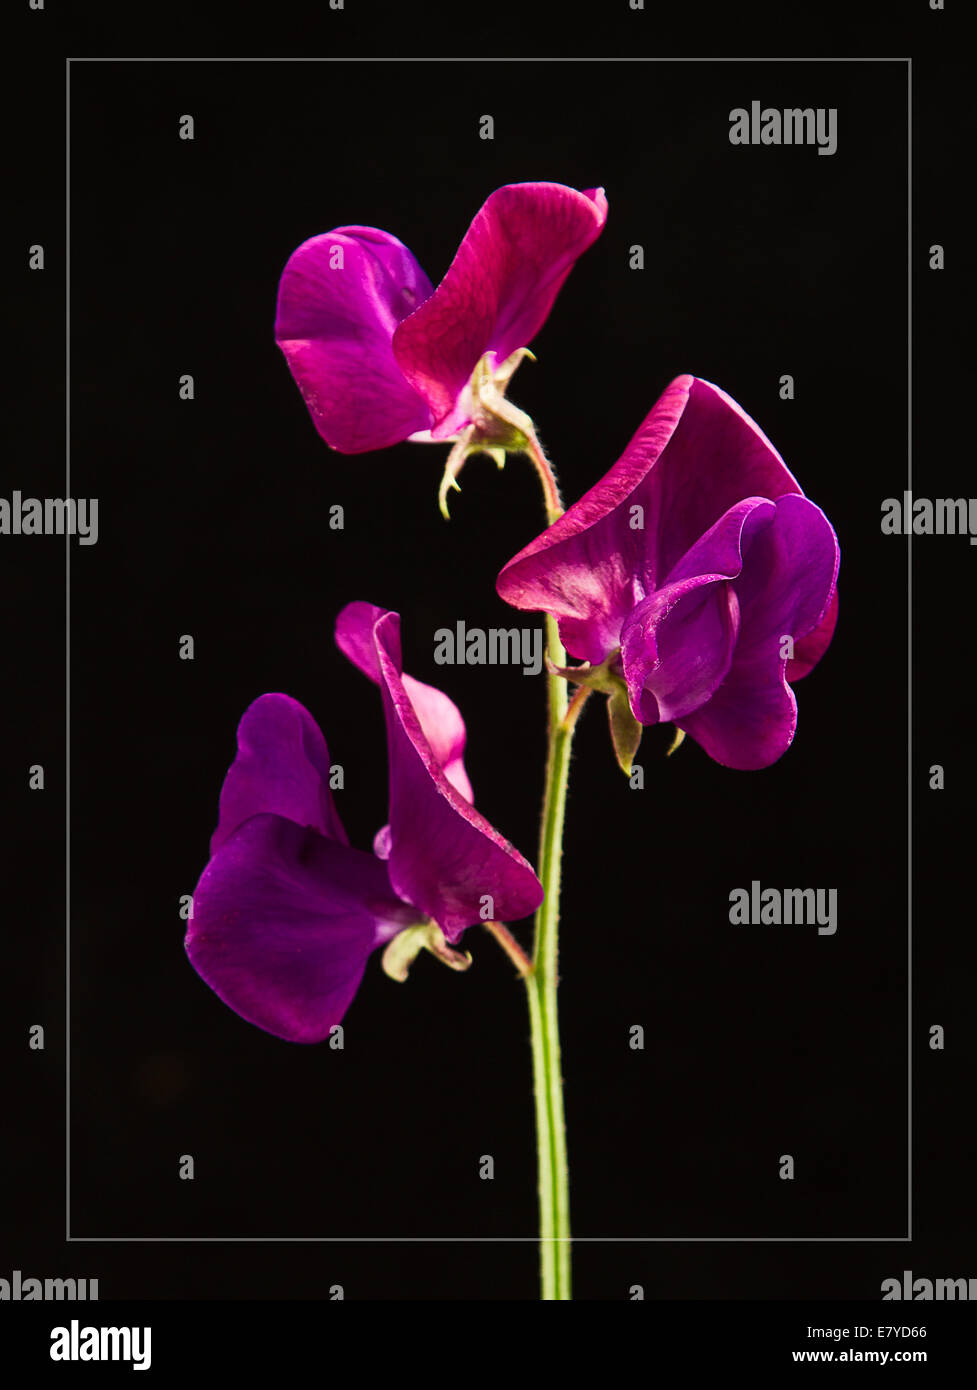 A beautiful, delicate purple-flowered Sweet Pea (Lathyrus odoratus), with raindrops, set against a black background. Stock Photo